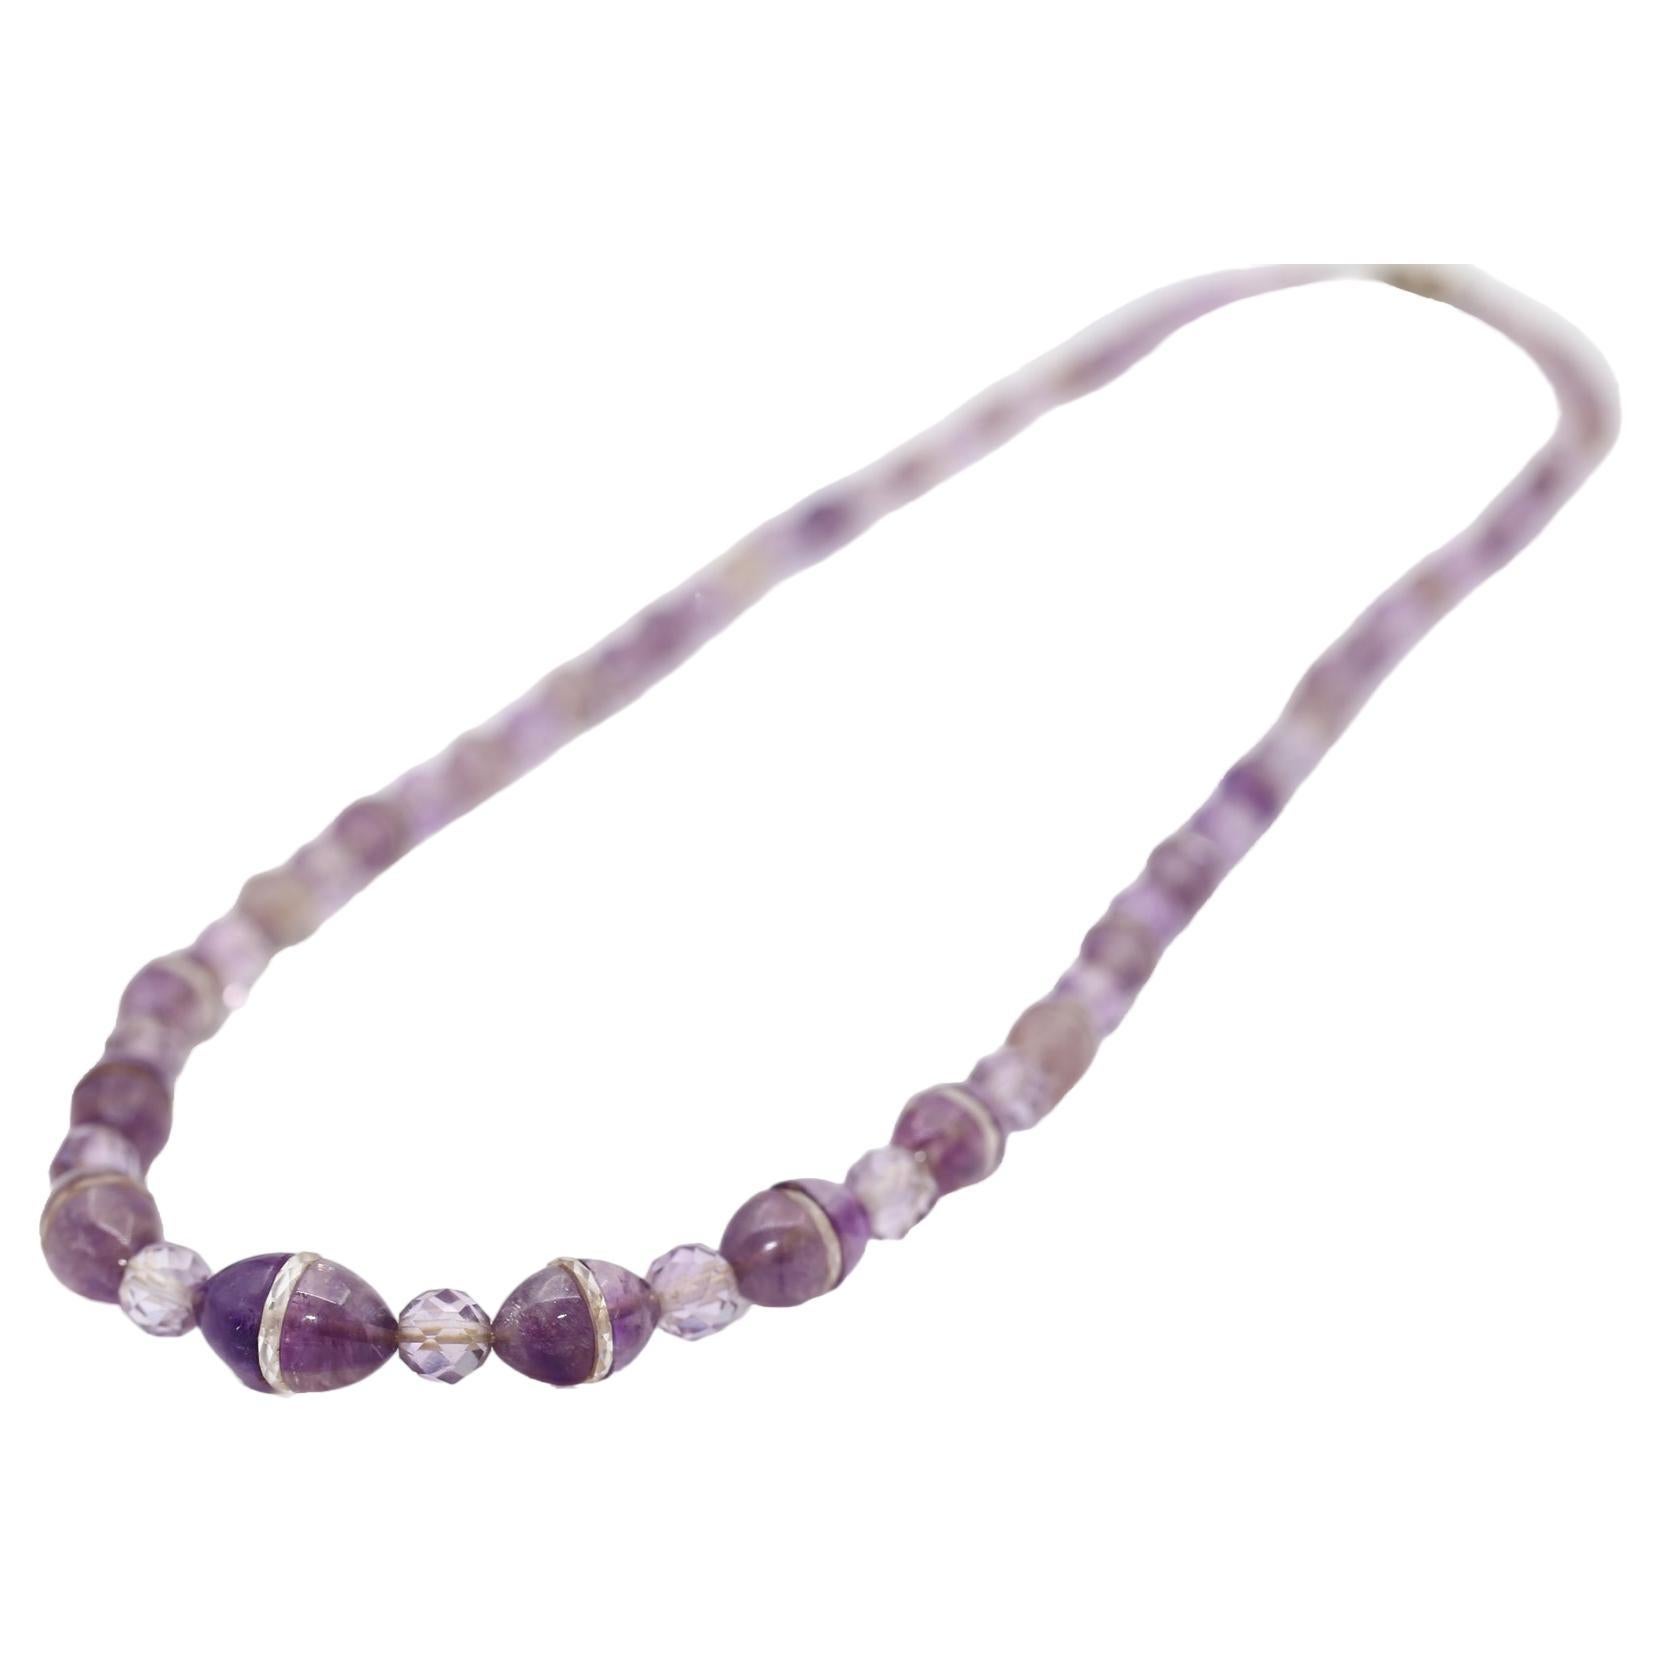 Art Deco Necklace comprising of Amethysts and  Rock Crystal Beads. Created around the 1920s. The necklace is quite heavy and has a fine presence to it. It can also be worn like a bracelet wrapped around a hand several times. You can have fun time